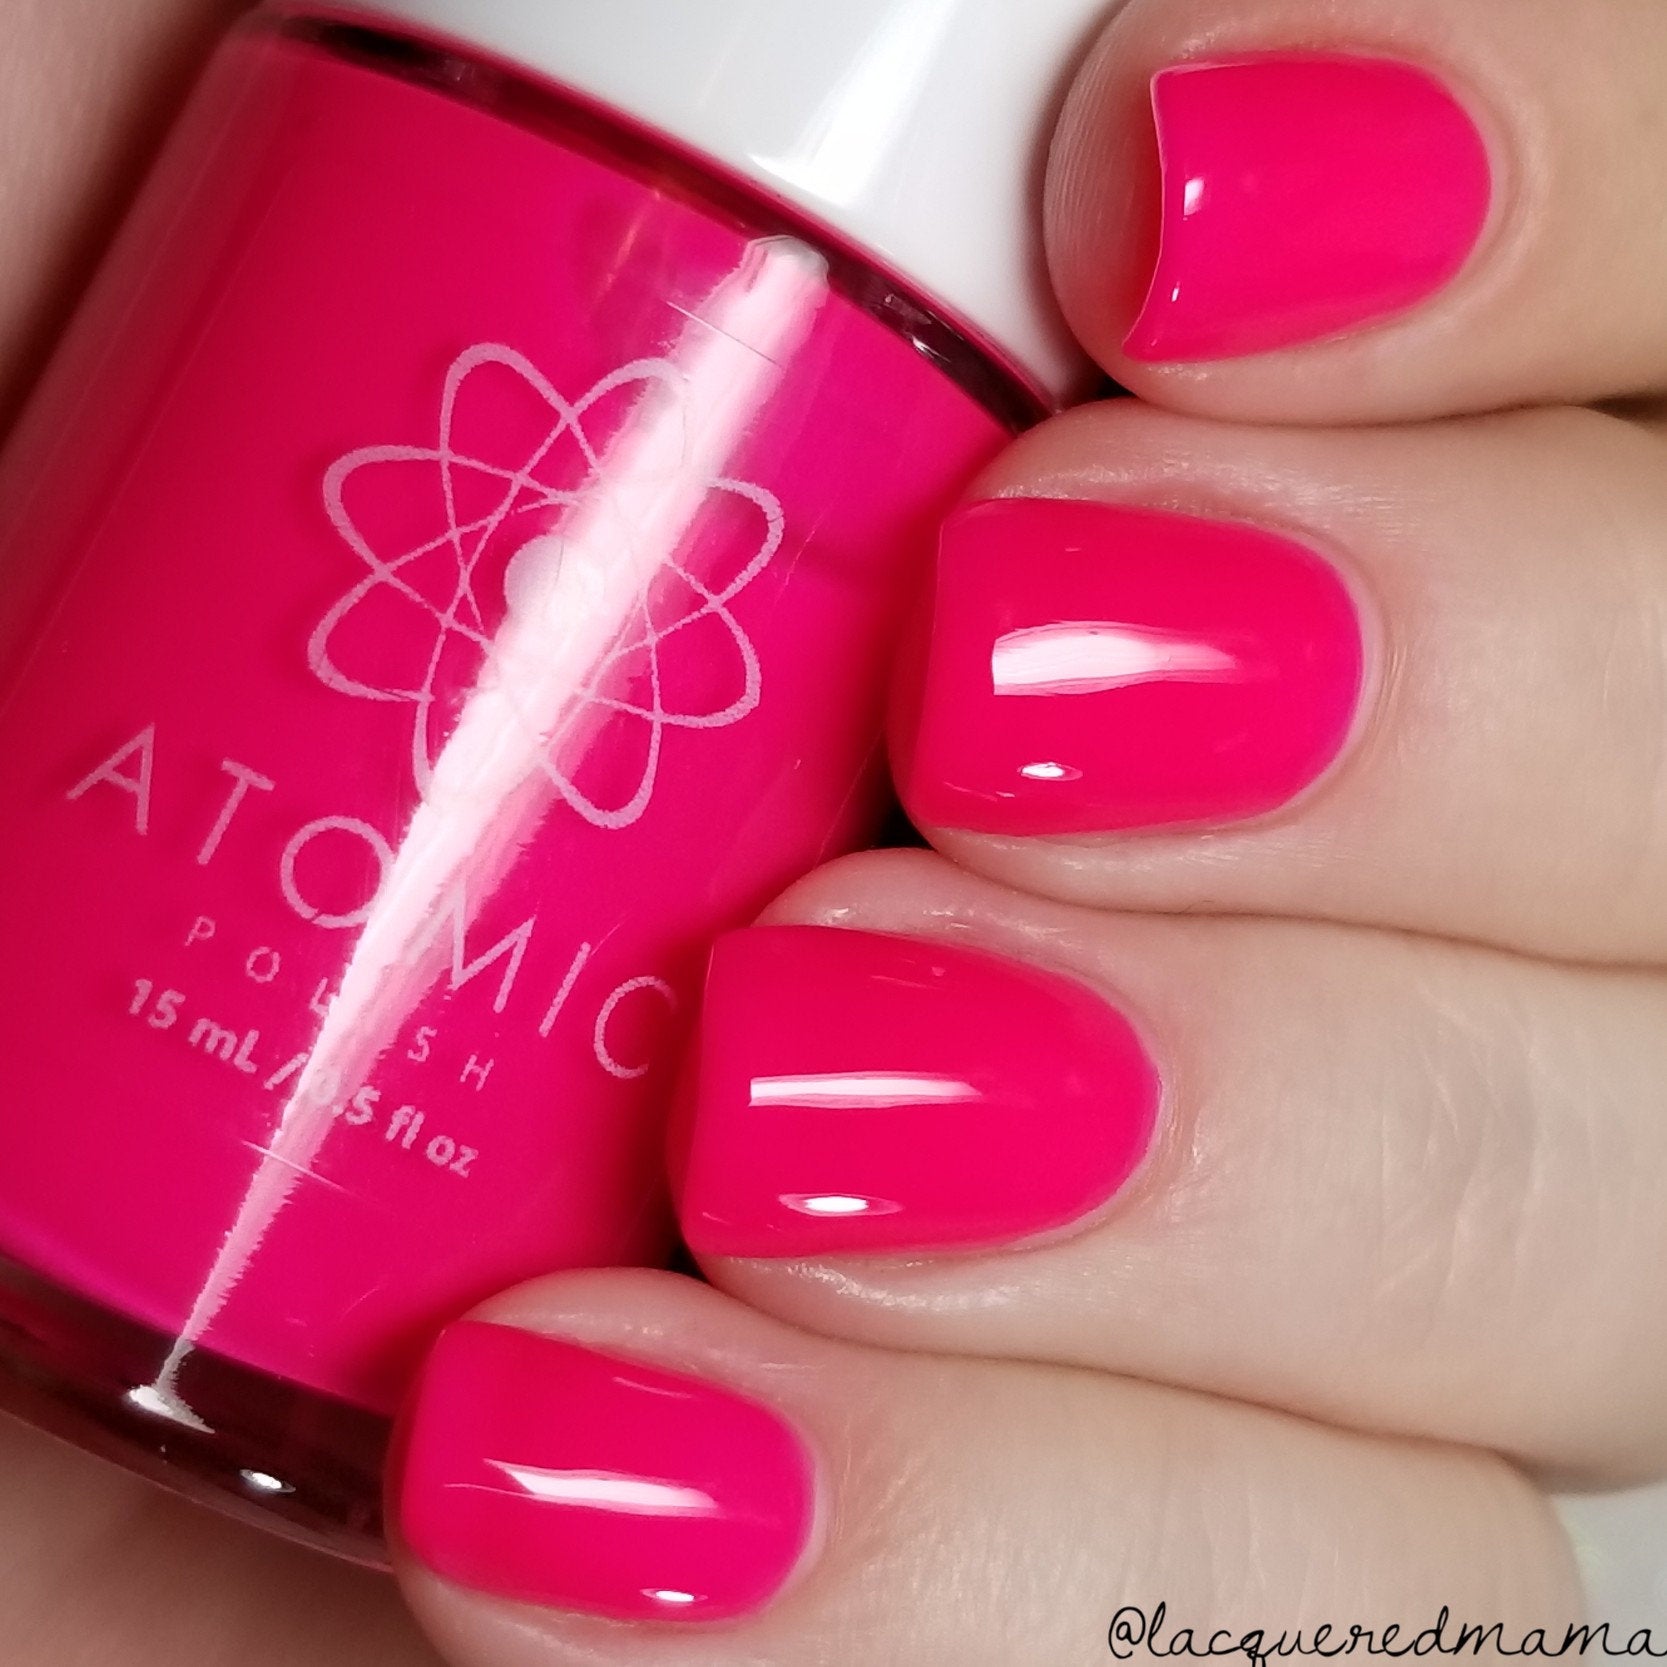 All About The Neon – Polish Me Snazzy